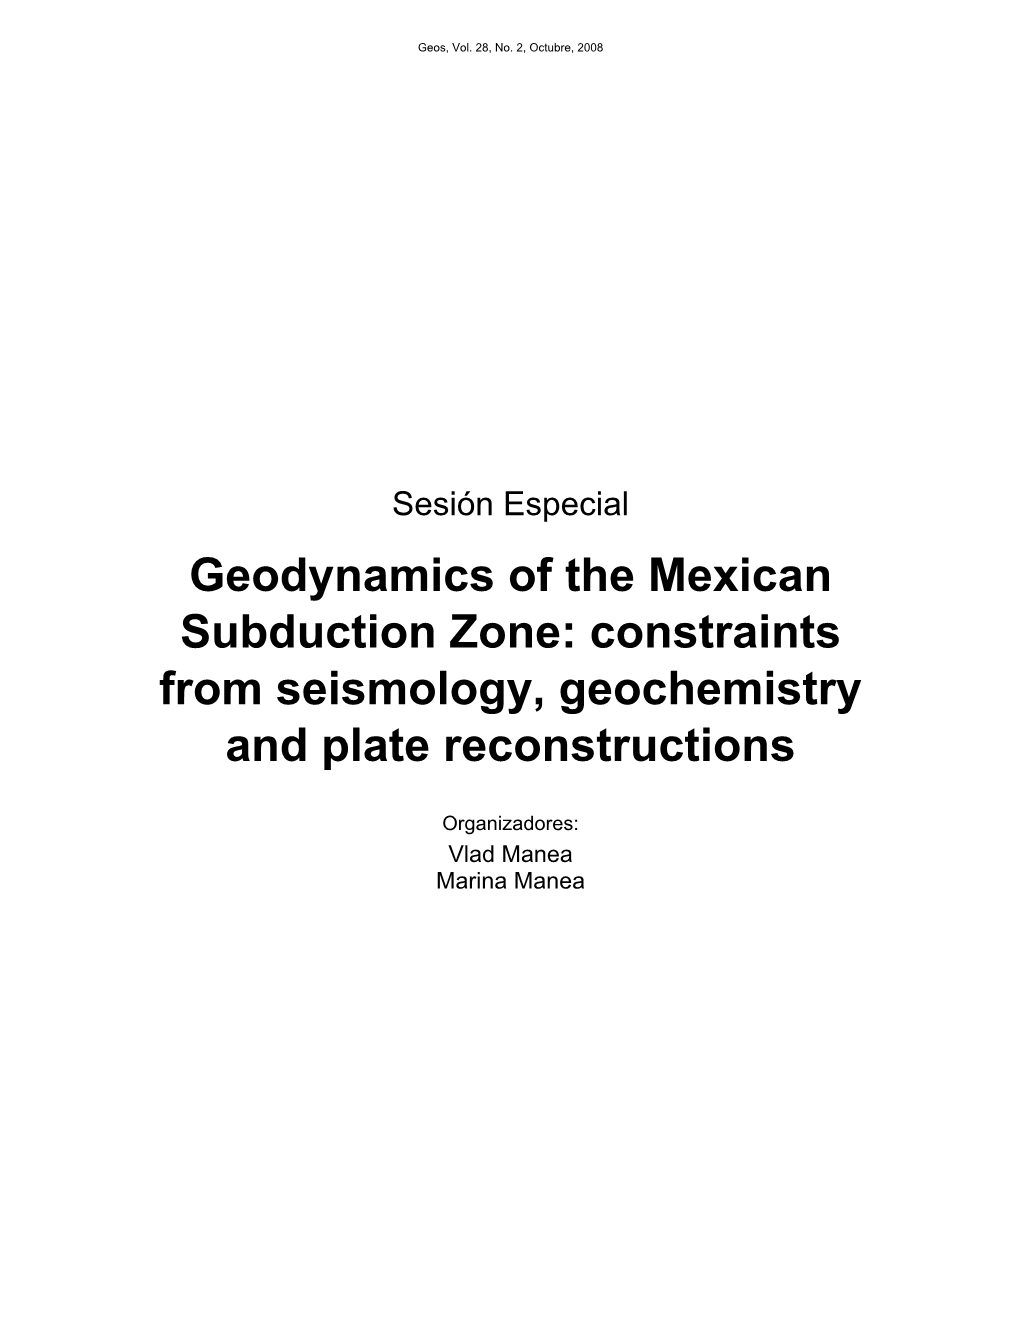 Geodynamics of the Mexican Subduction Zone: Constraints from Seismology, Geochemistry and Plate Reconstructions